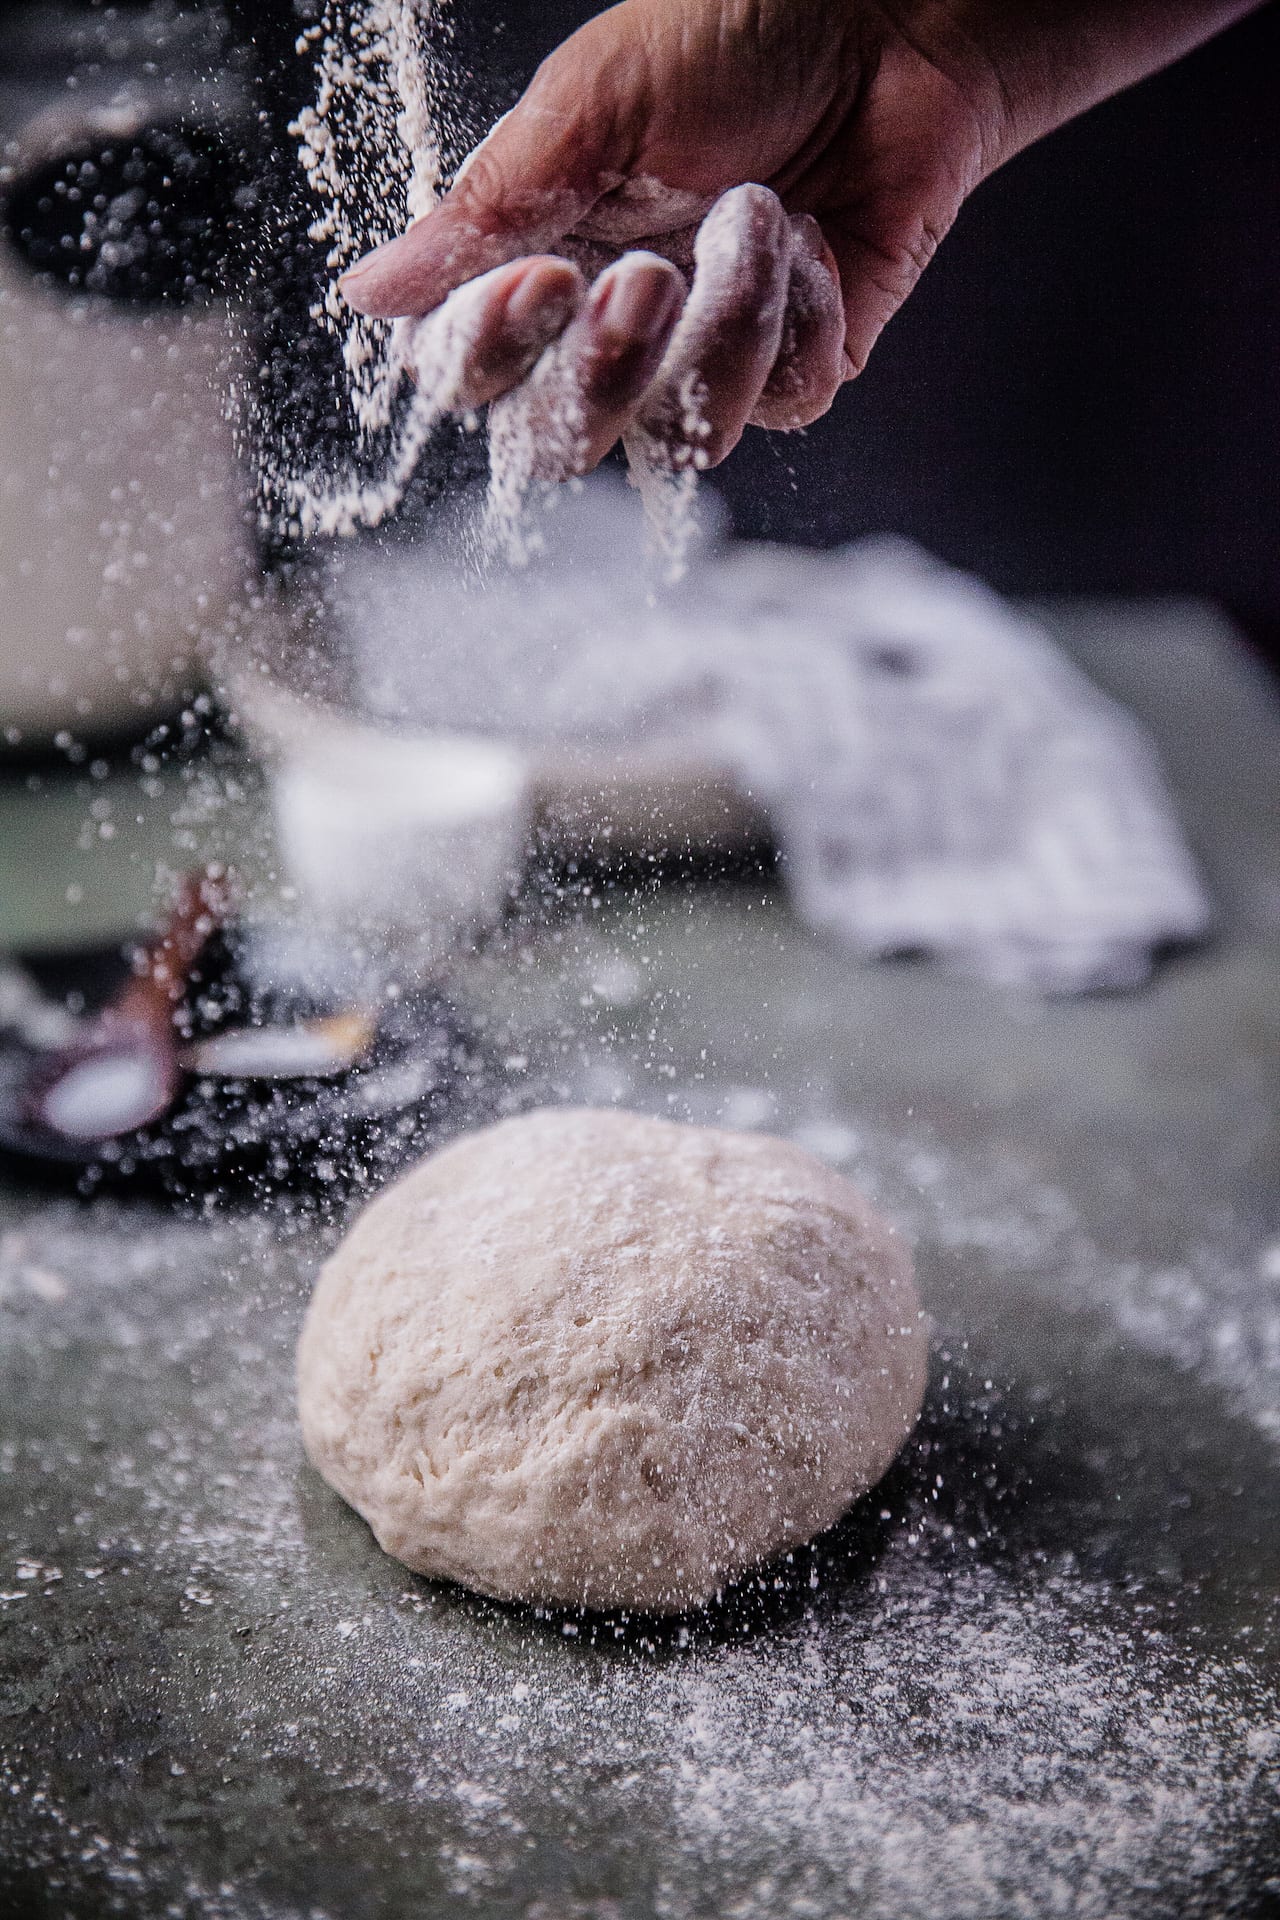 Dusting Flour Food Photography | Sifting Flour For Bengali Luchi | Poori | Deep Fried Indian Flatbread #indian #bread #deepfried #poori #luchi #breakfast #recipe #foodphotography | Playful Cooking